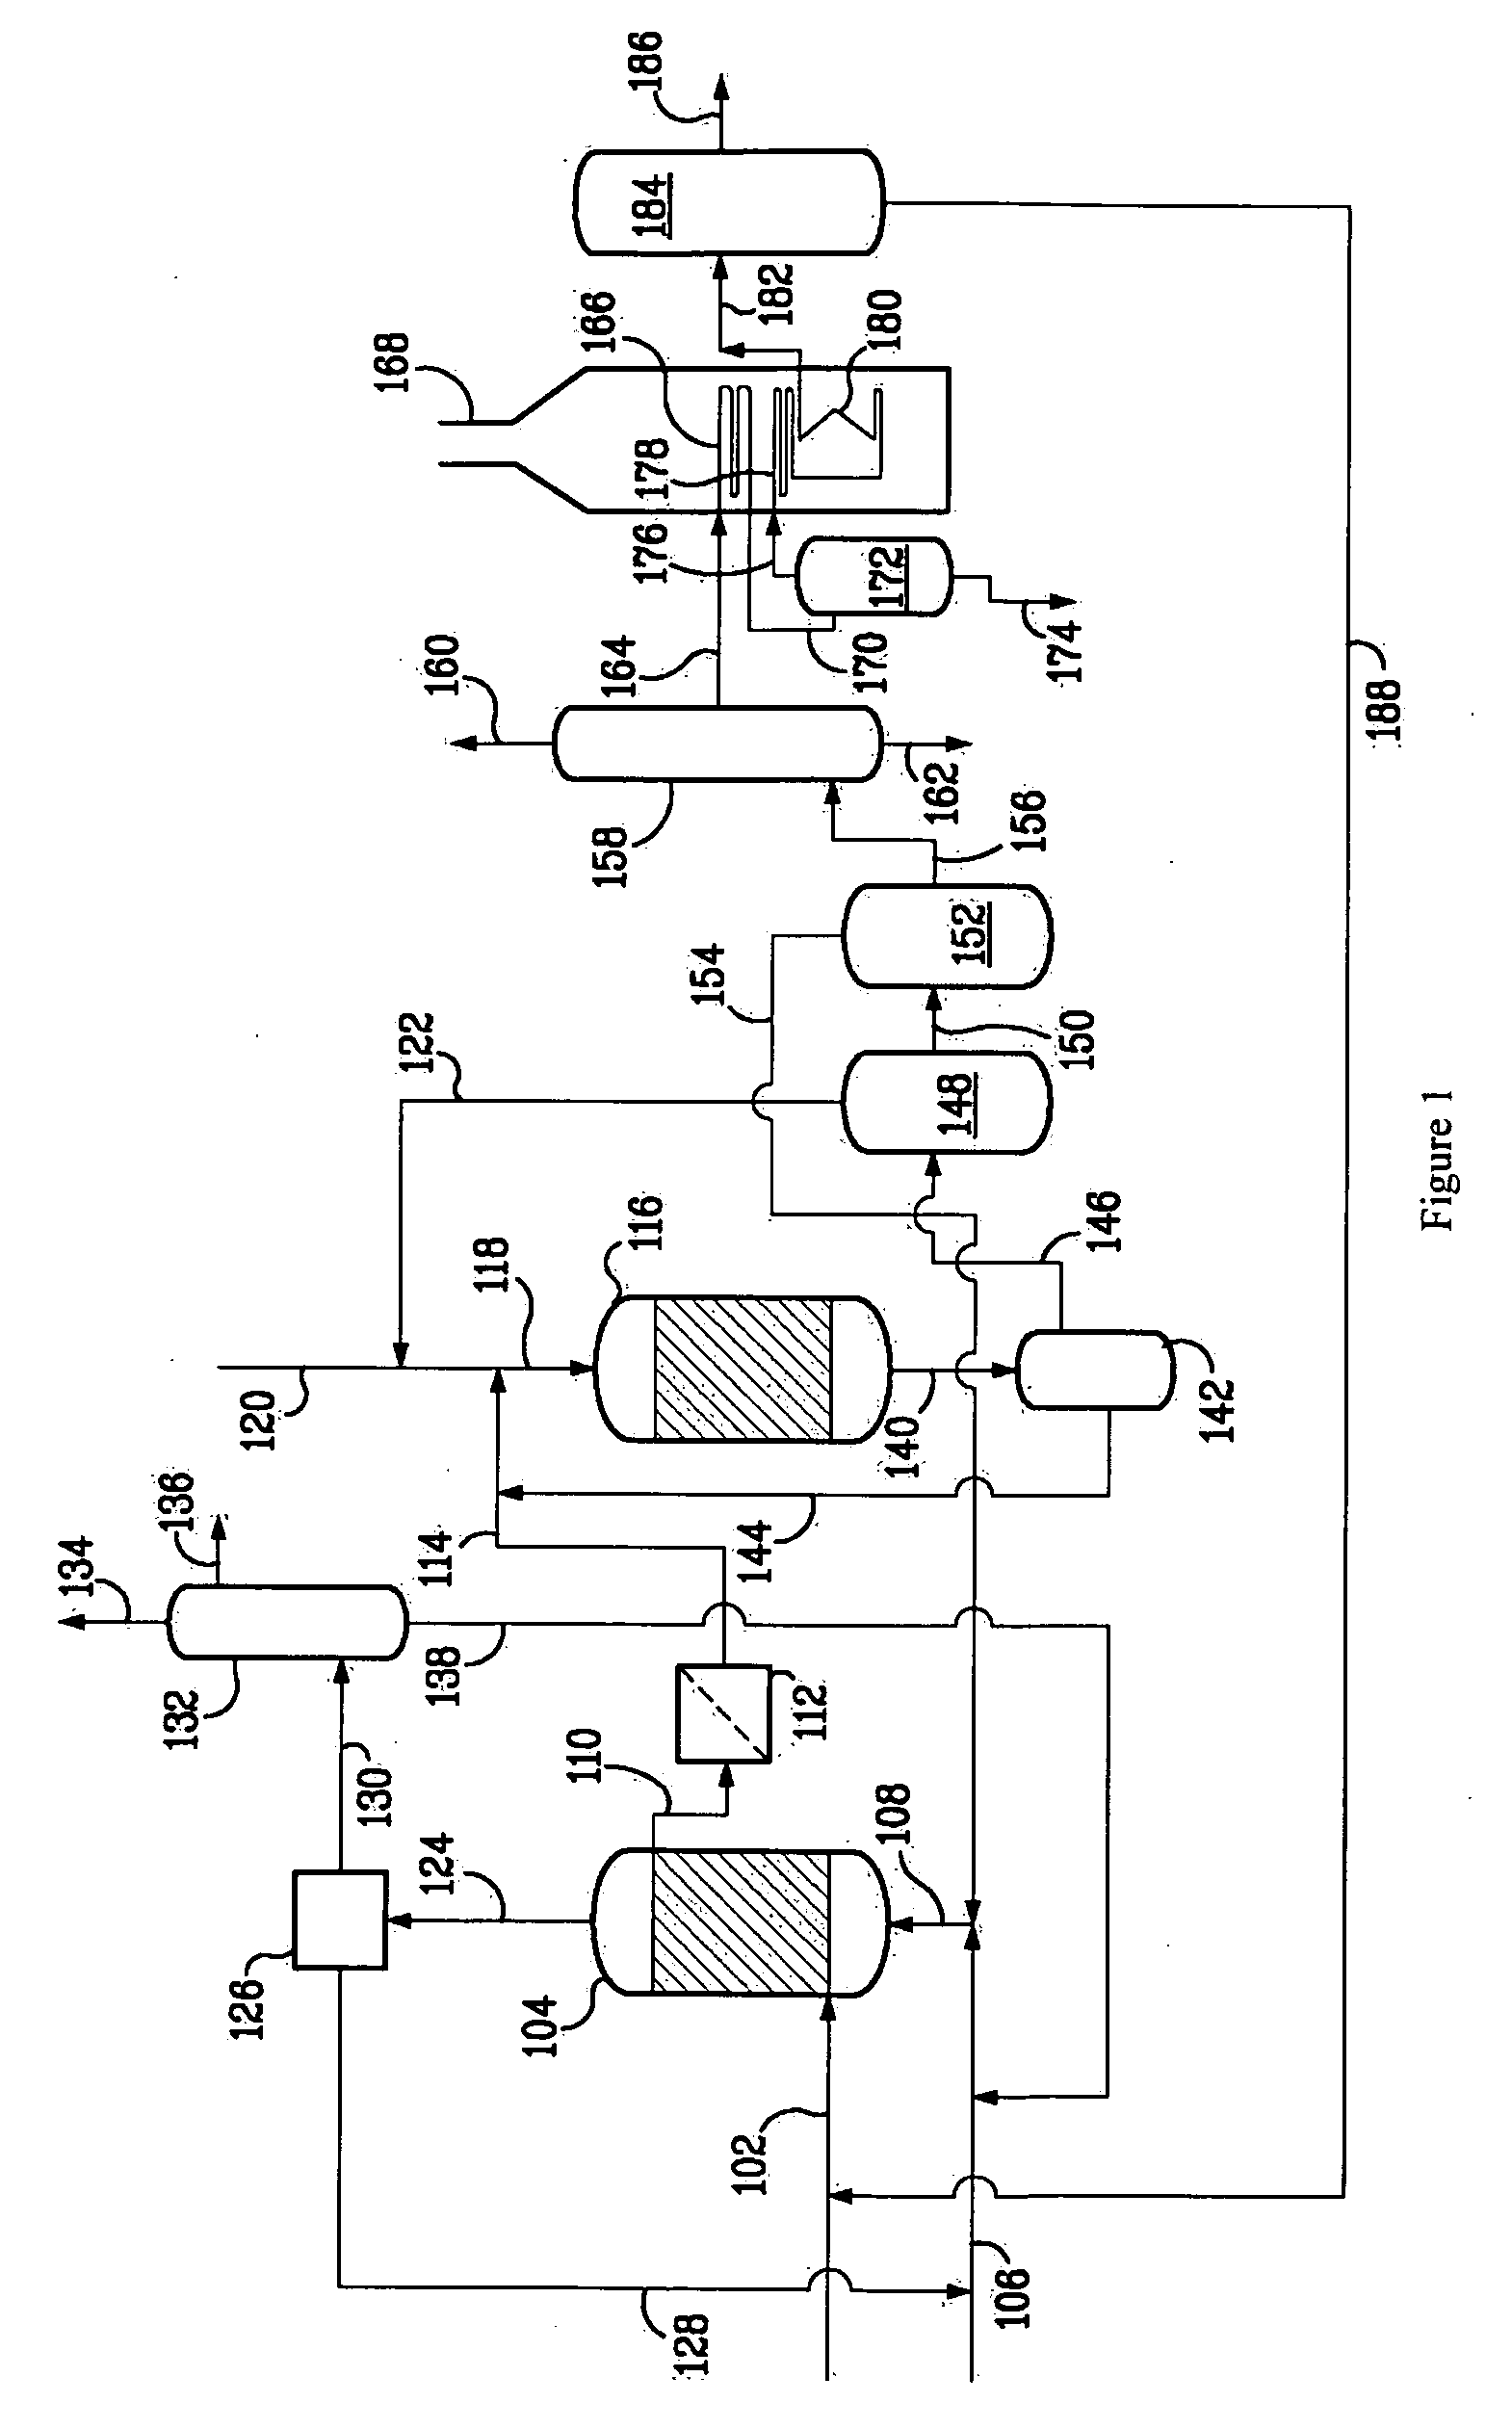 Process and Apparatus for Using Steam Cracked Tar as Steam Cracker Feed